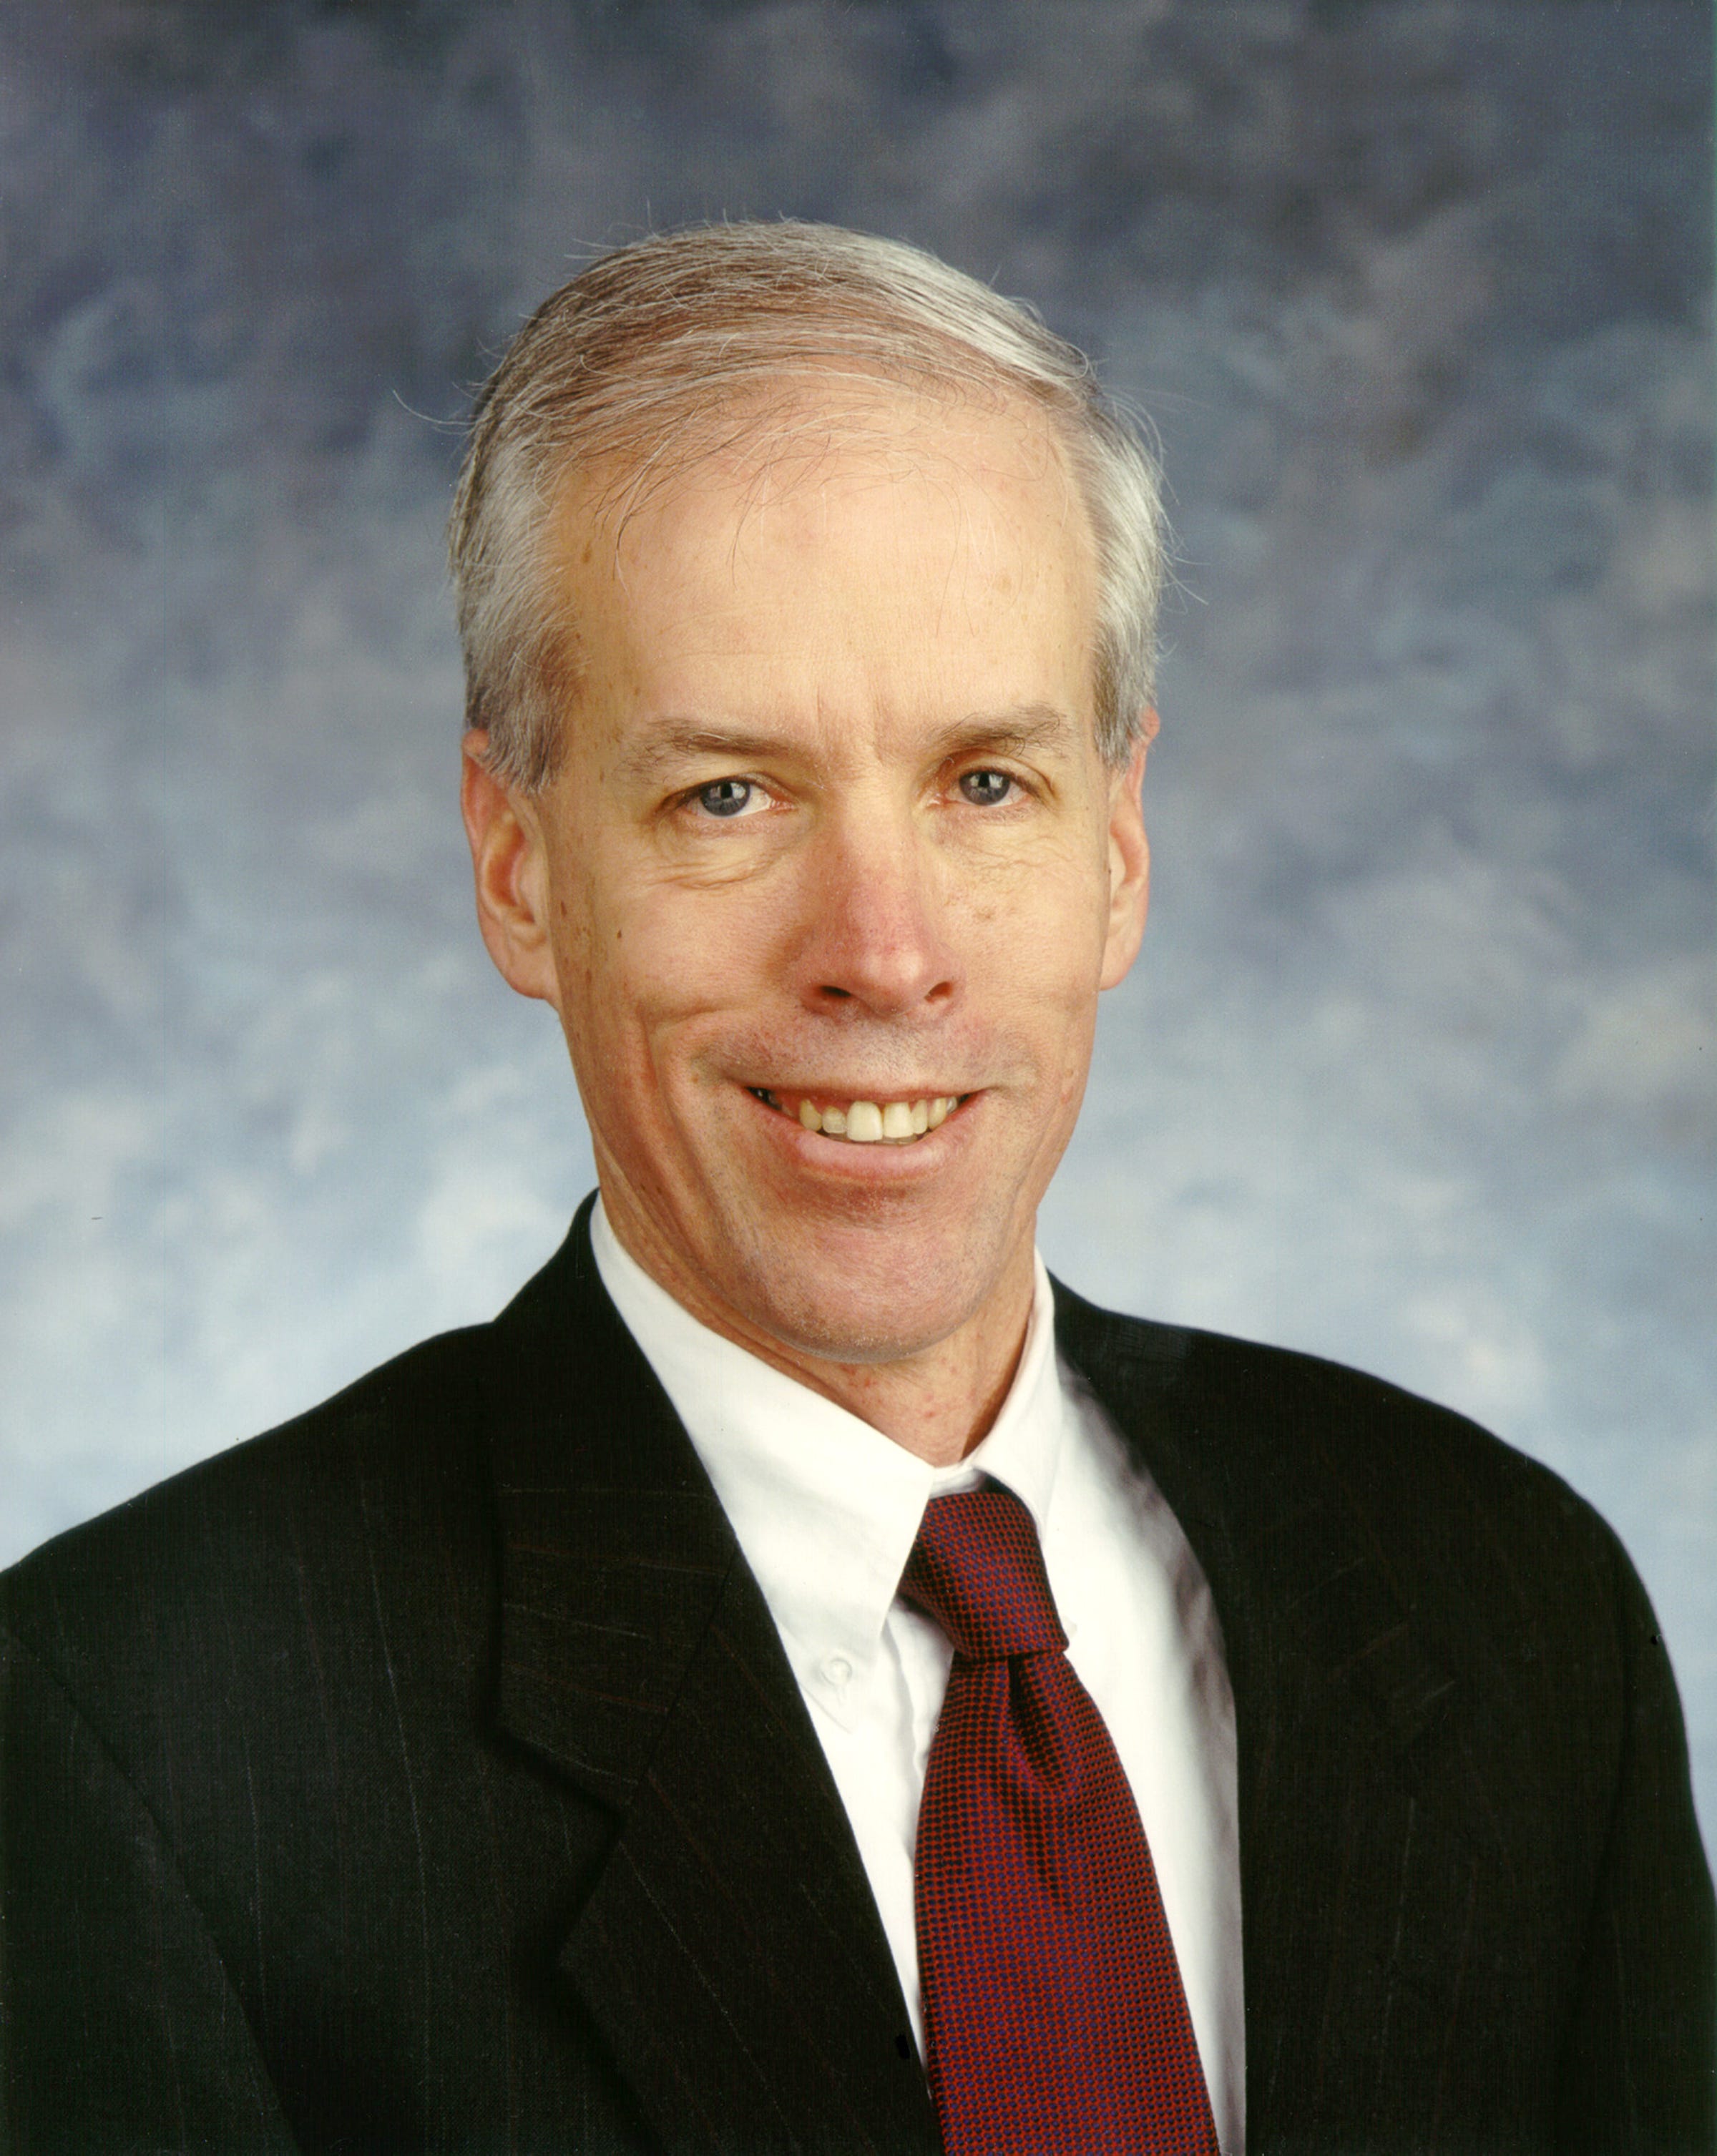 Fischer, a Republican, joined the Kentucky House in 1999